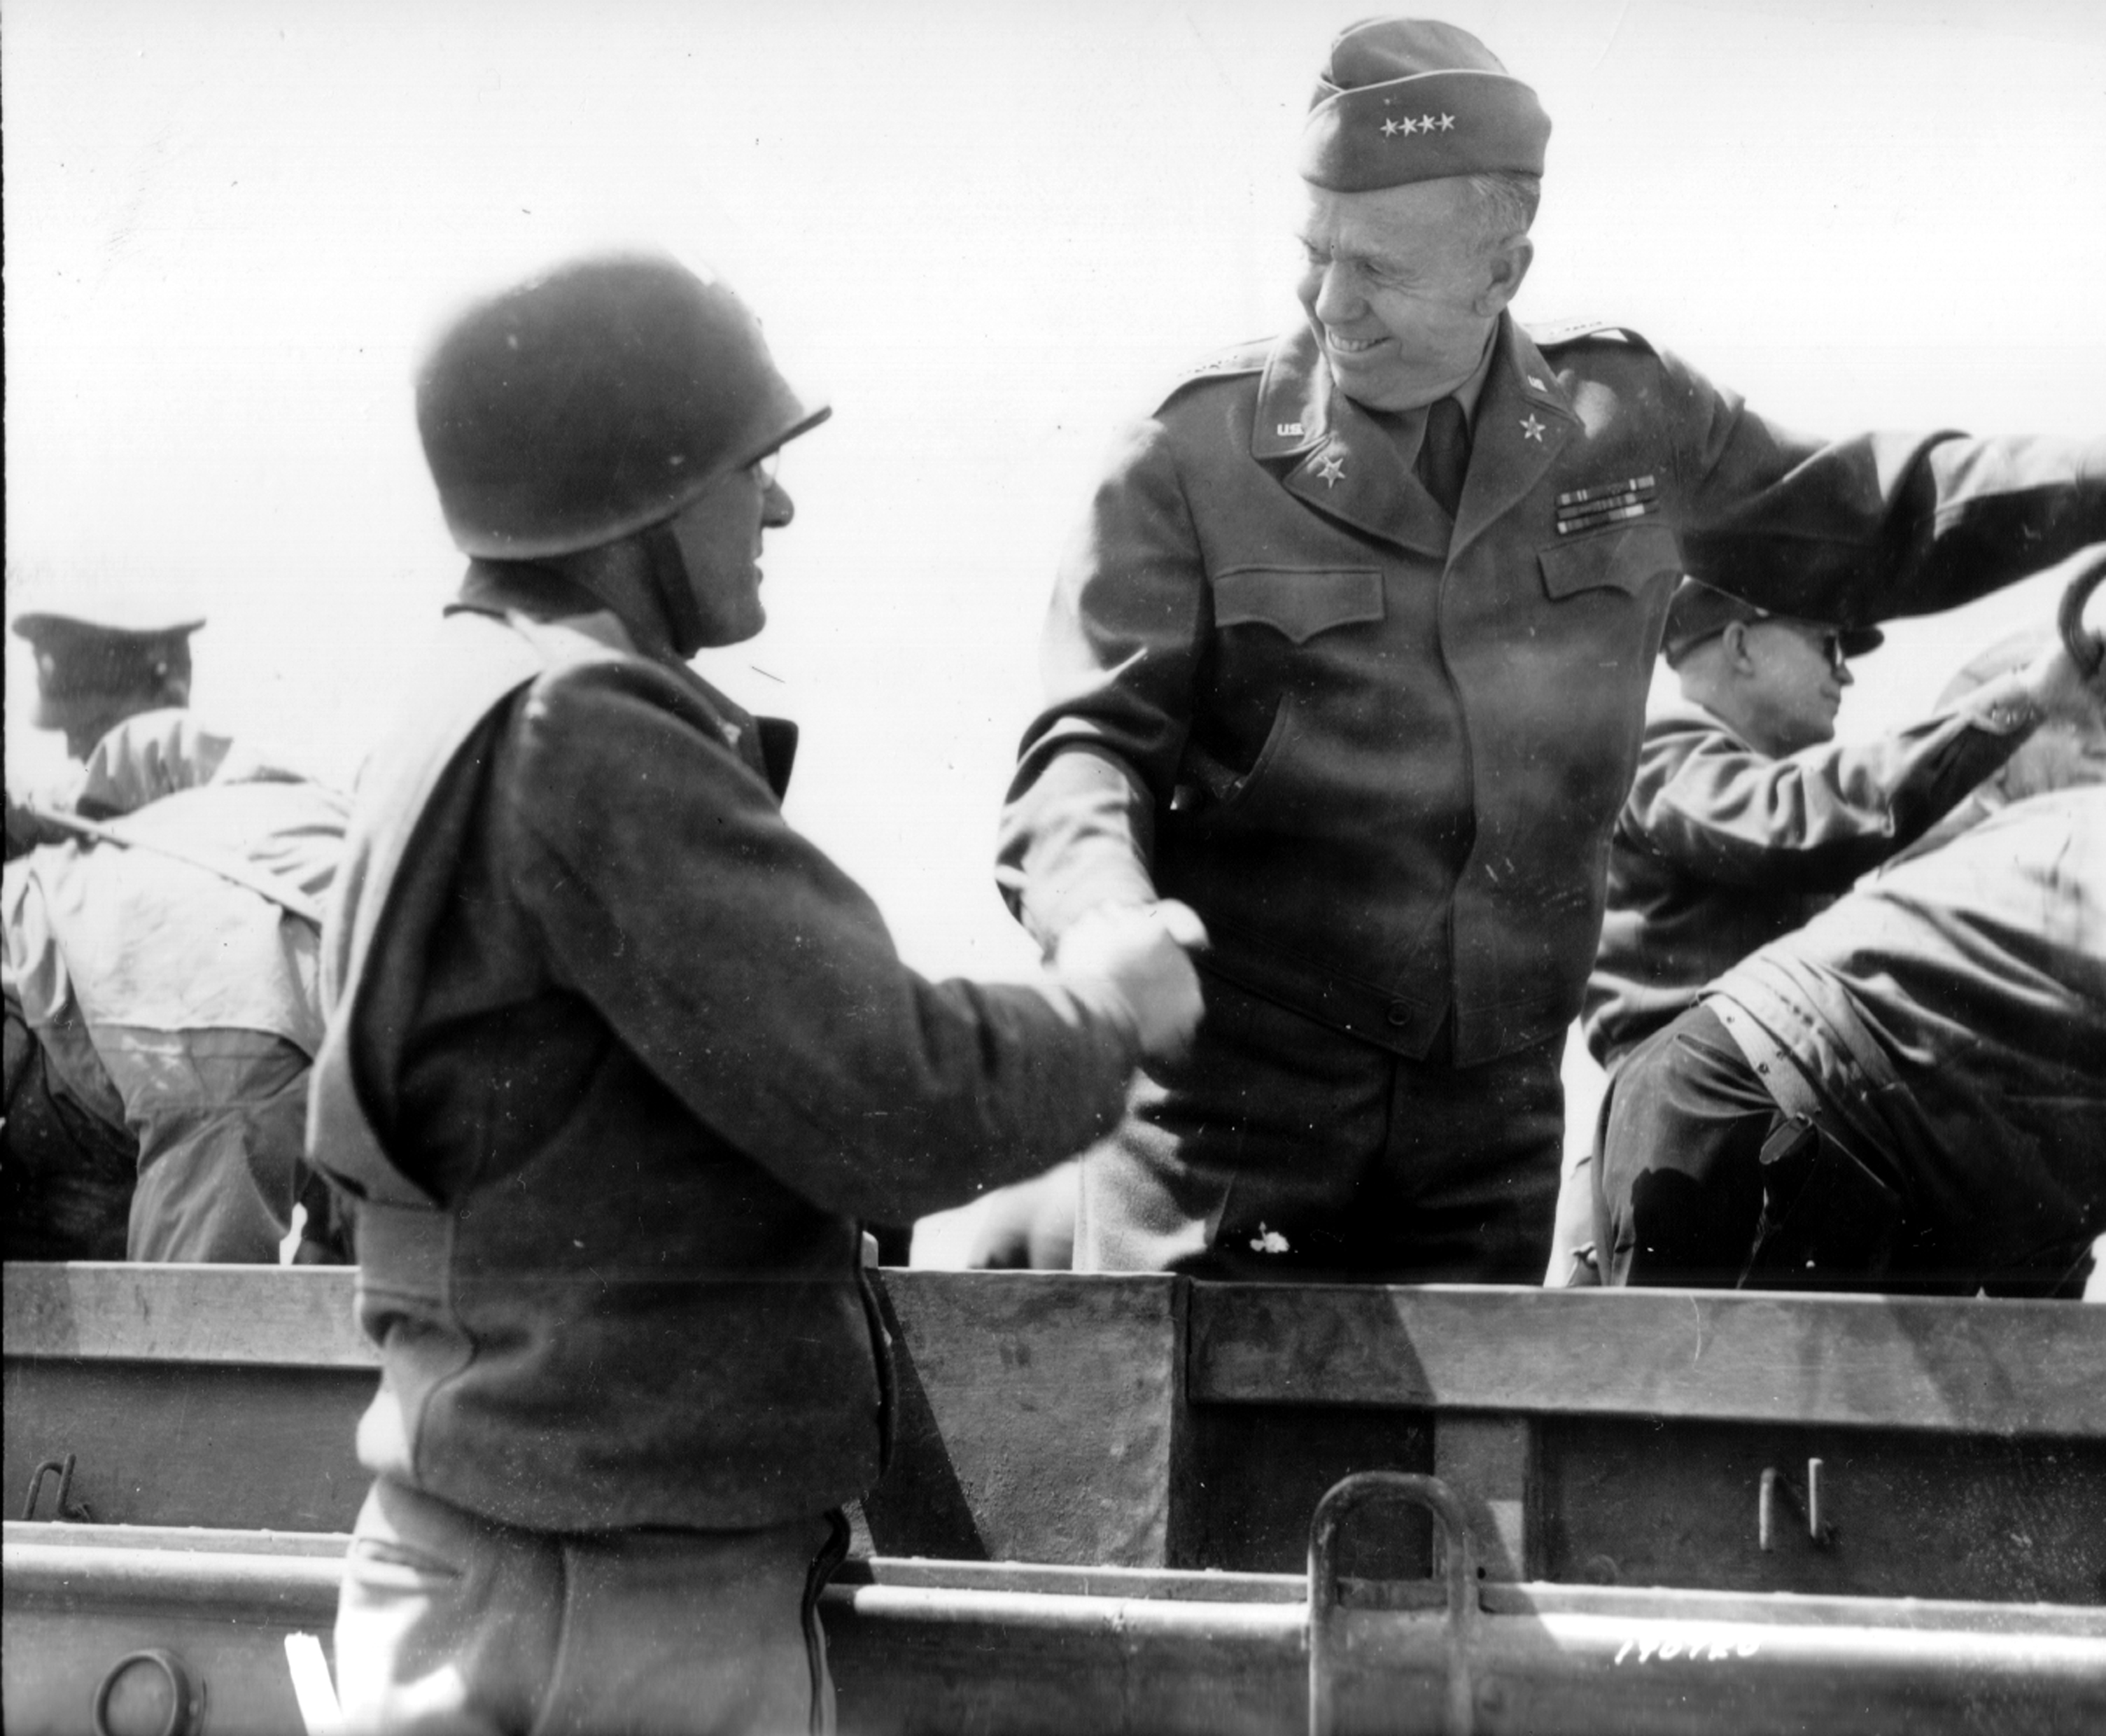 US Army Chief of Staff, Gen George Marshall shakes hands with another officer during his tour of the Normandy beachhead, Normandy, France, Jun 12, 1944.  Note Gen Eisenhower behind Marshall.